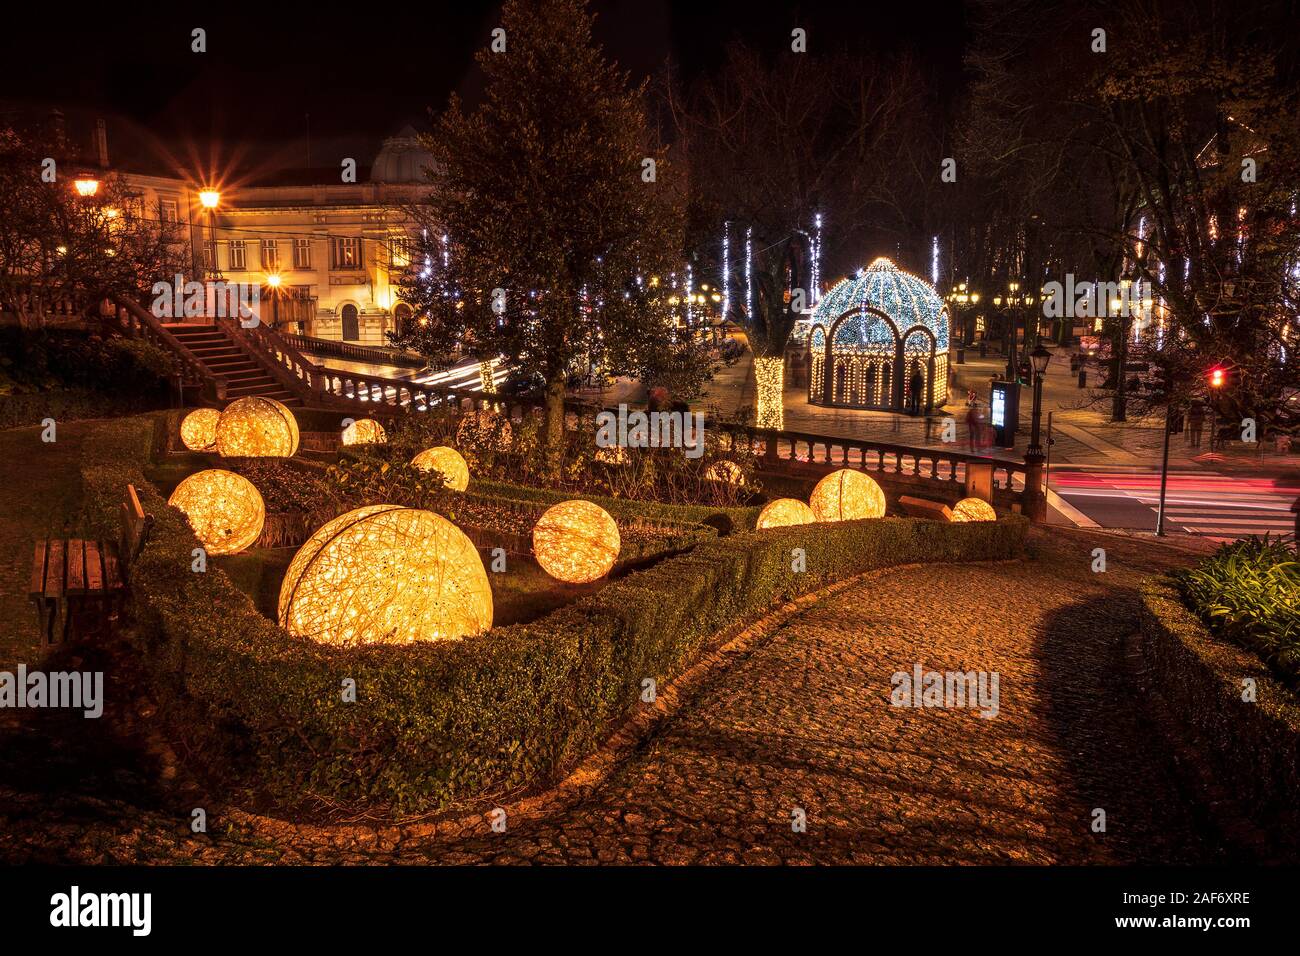 Viseu, Portugal - November 30, 2019: View of the Mother's Garden and Rossio Square in Viseu, Portugal, with Christmas lights. Stock Photo